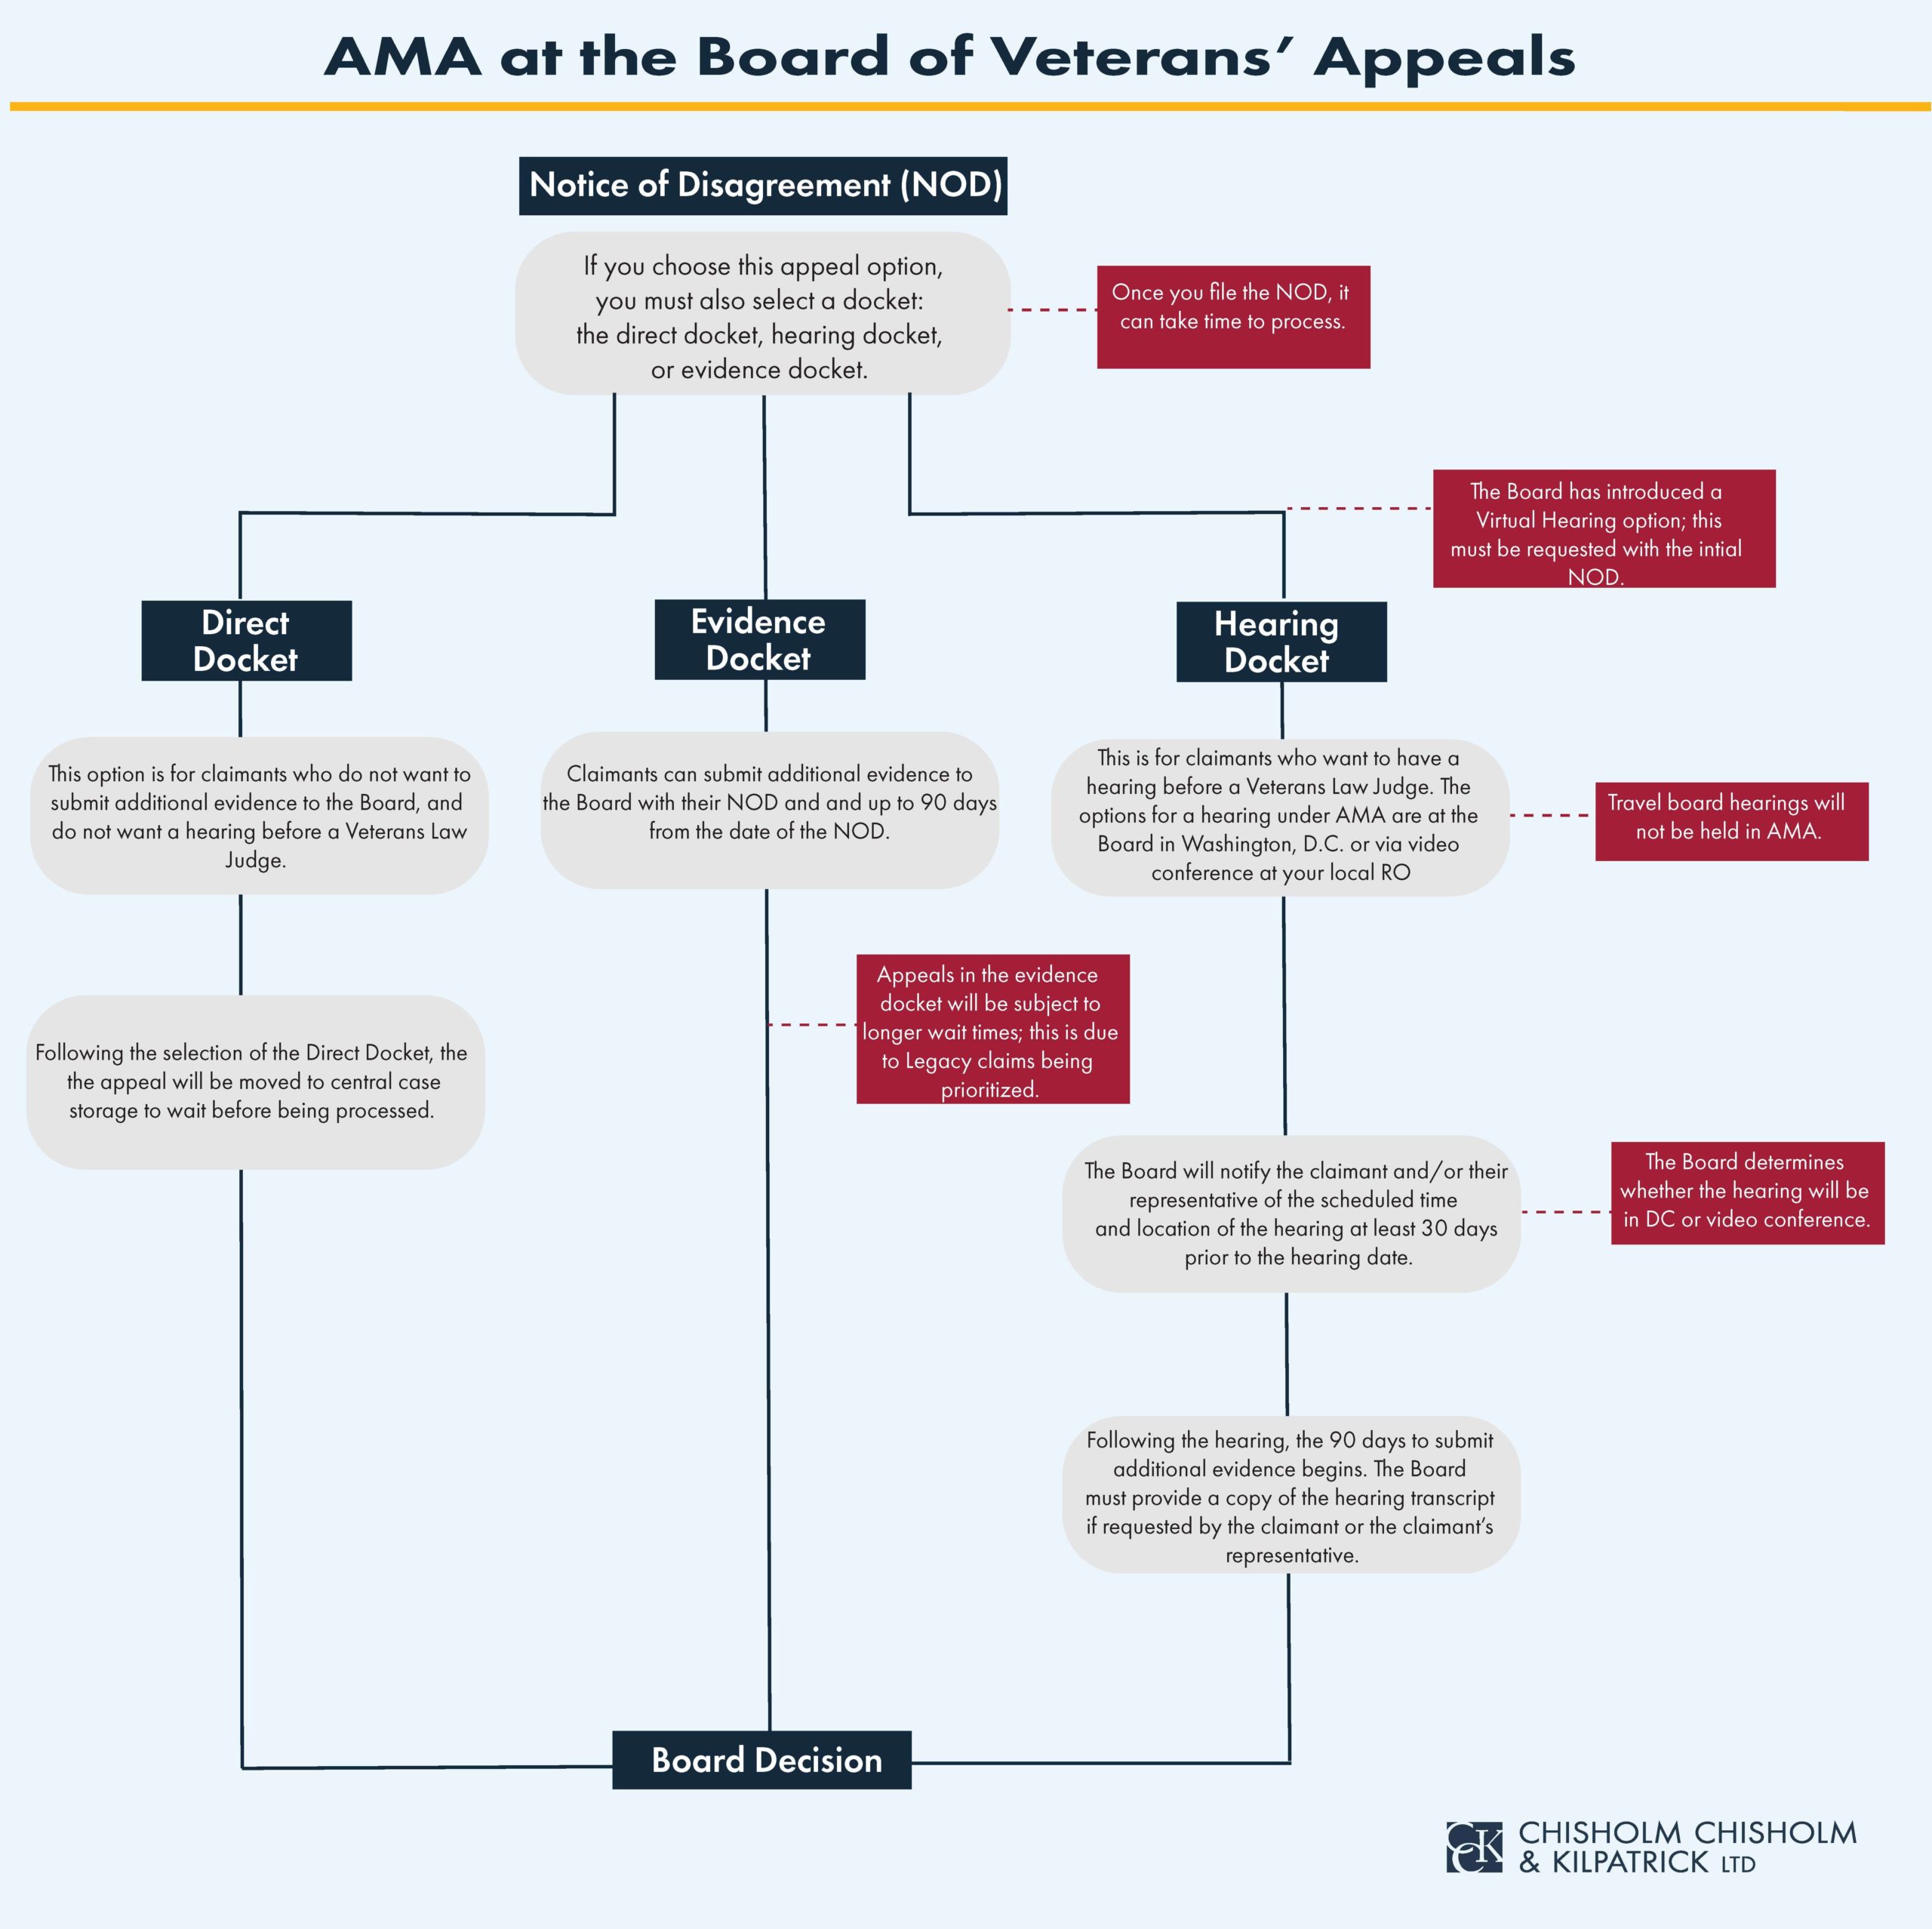 Do You NEED that Board of Veterans